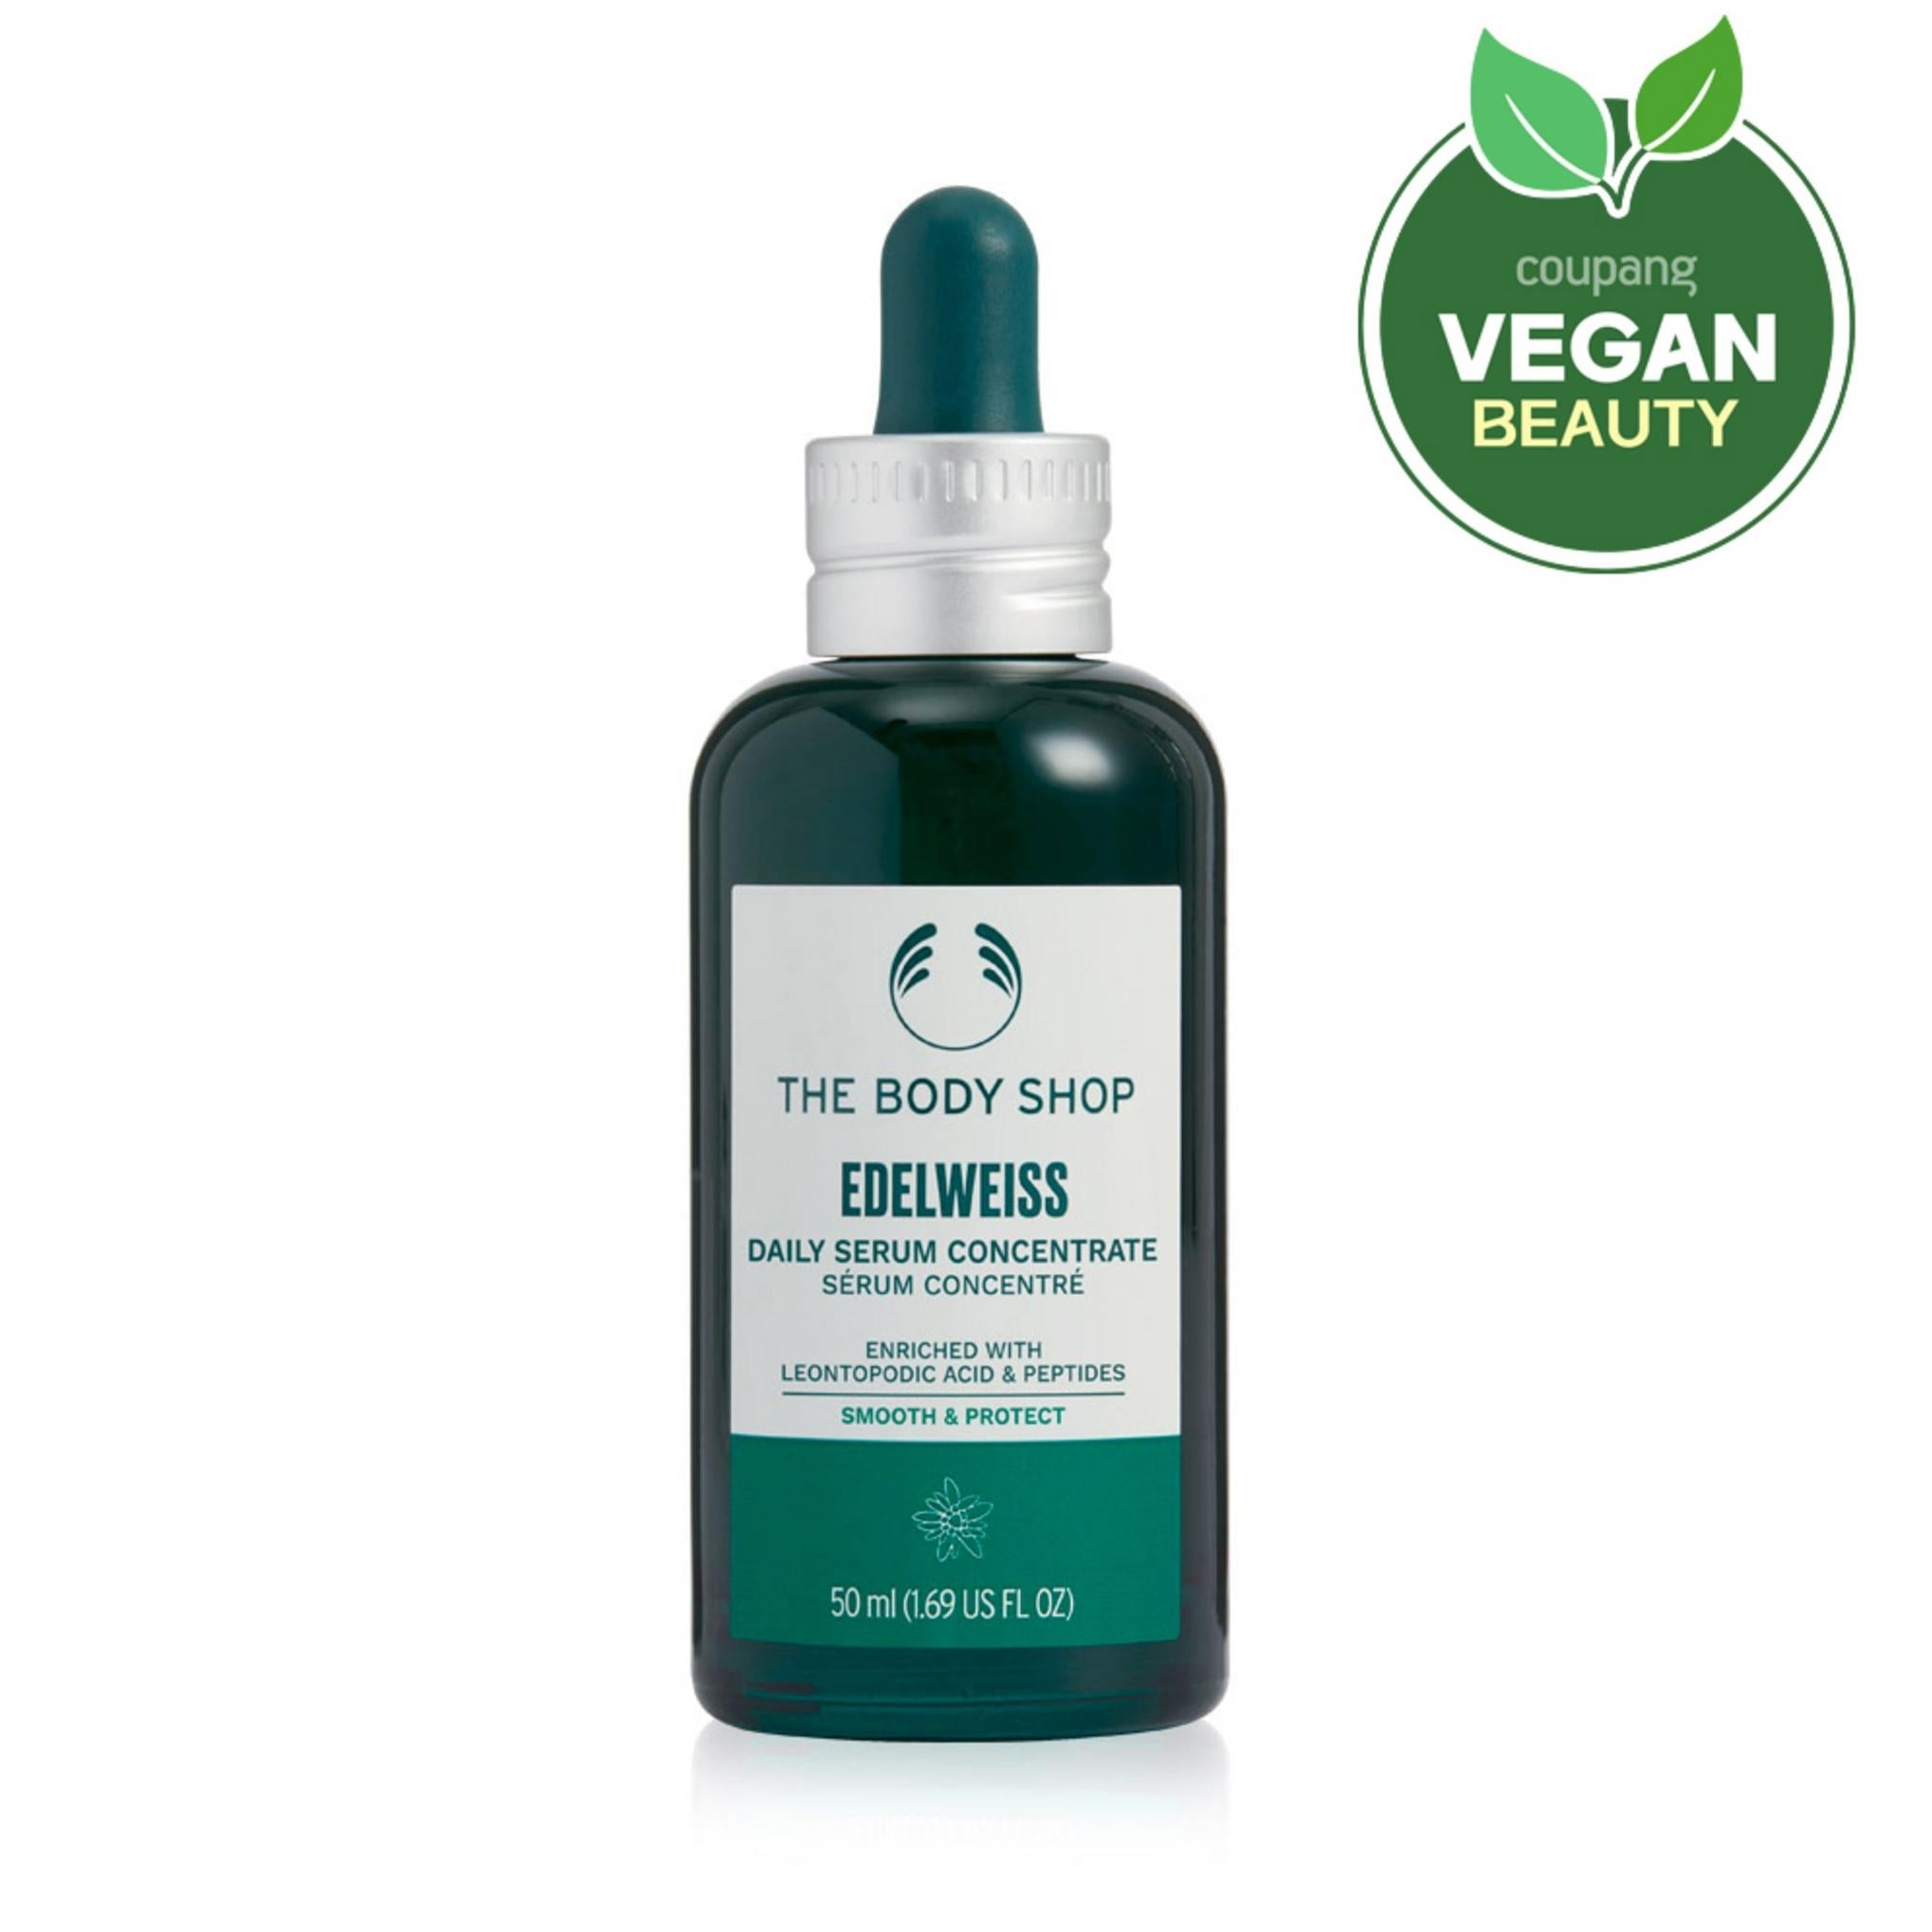 The Body Shop Edelweiss Serum Concentrate